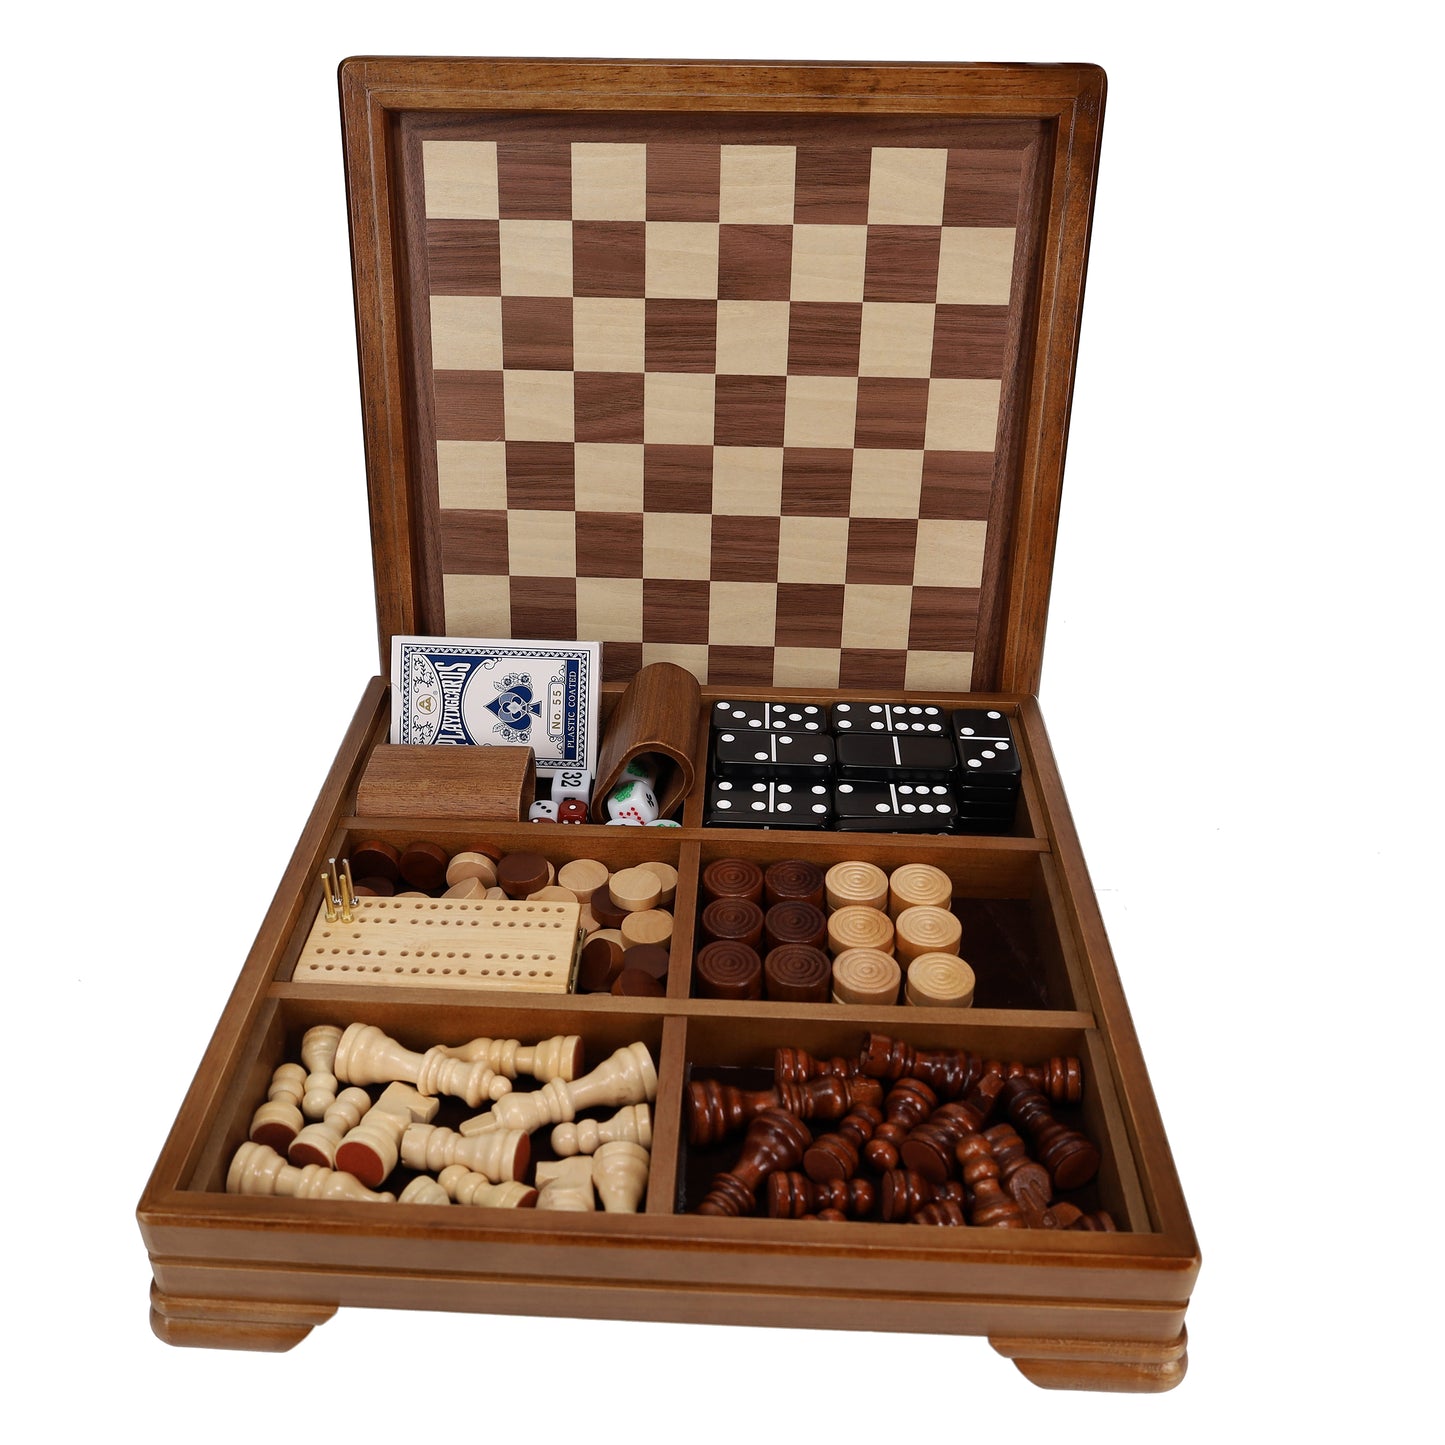 Walnut 7-Games-in-1 Combination Game Set – Includes Chess, Checkers, Backgammon, Dominoes, Cribbage, Poker Dice and Cards